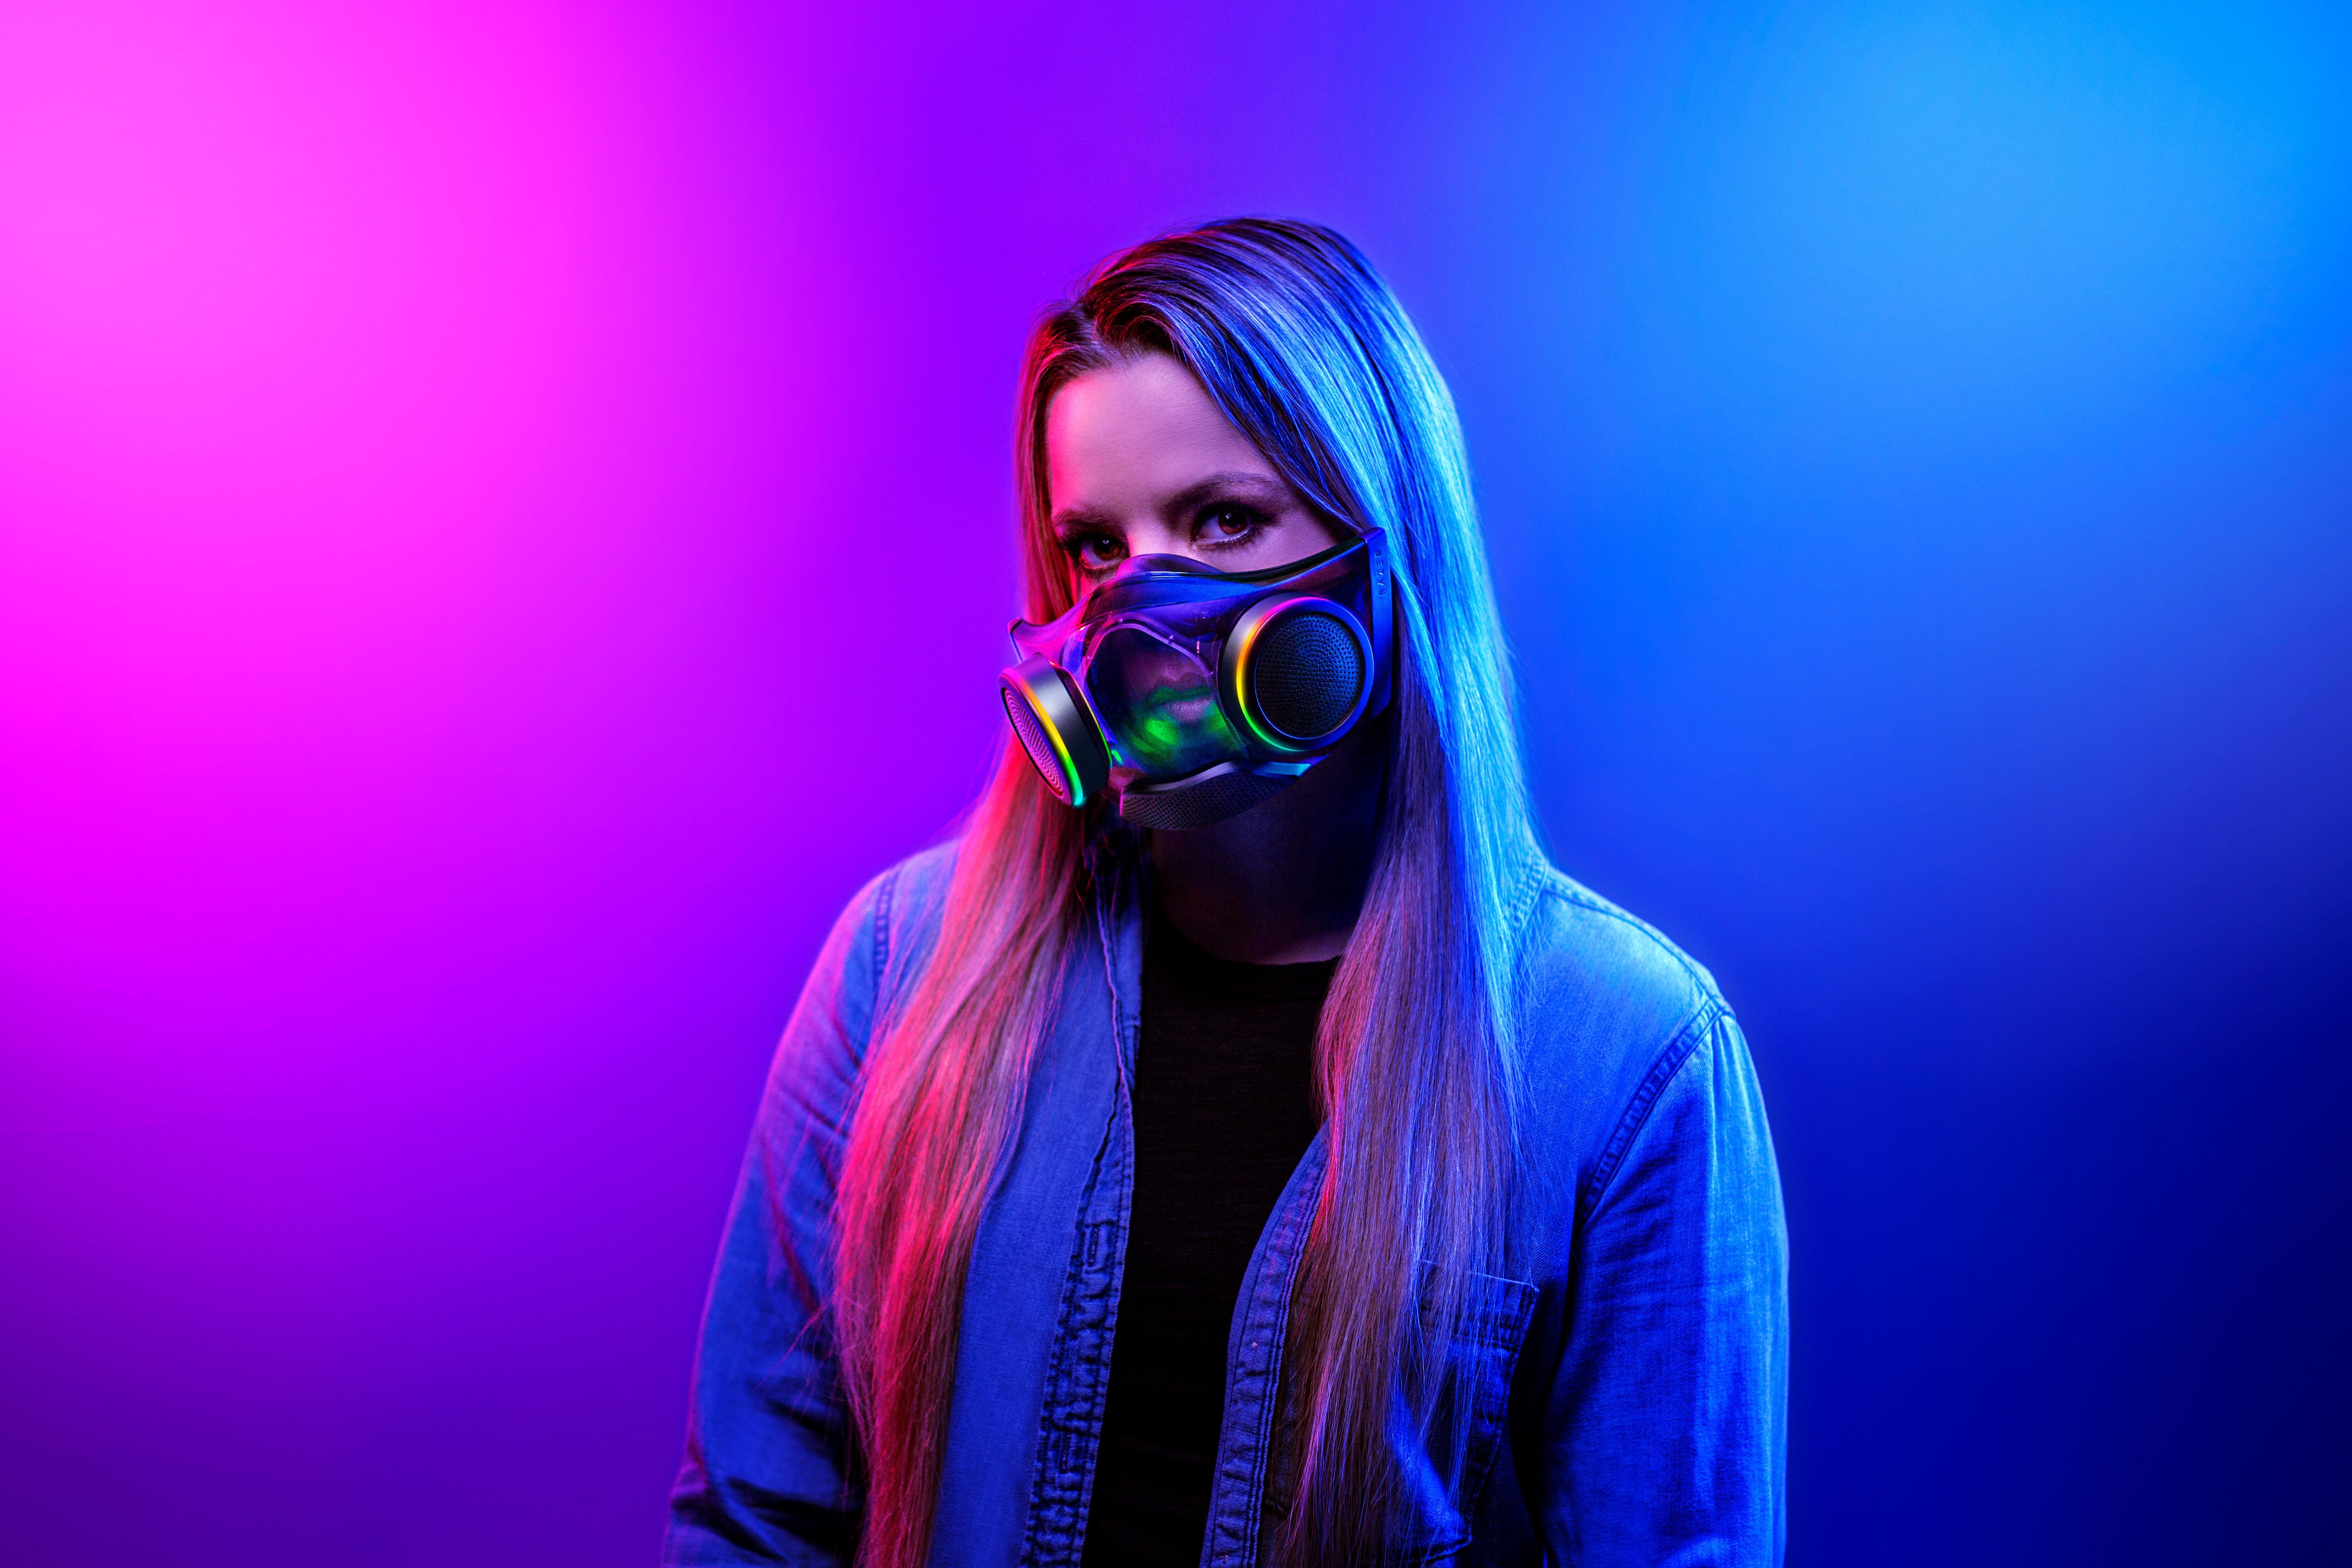 Razer Zephyr is a high-tech mask with cooling fans and multicolored lights